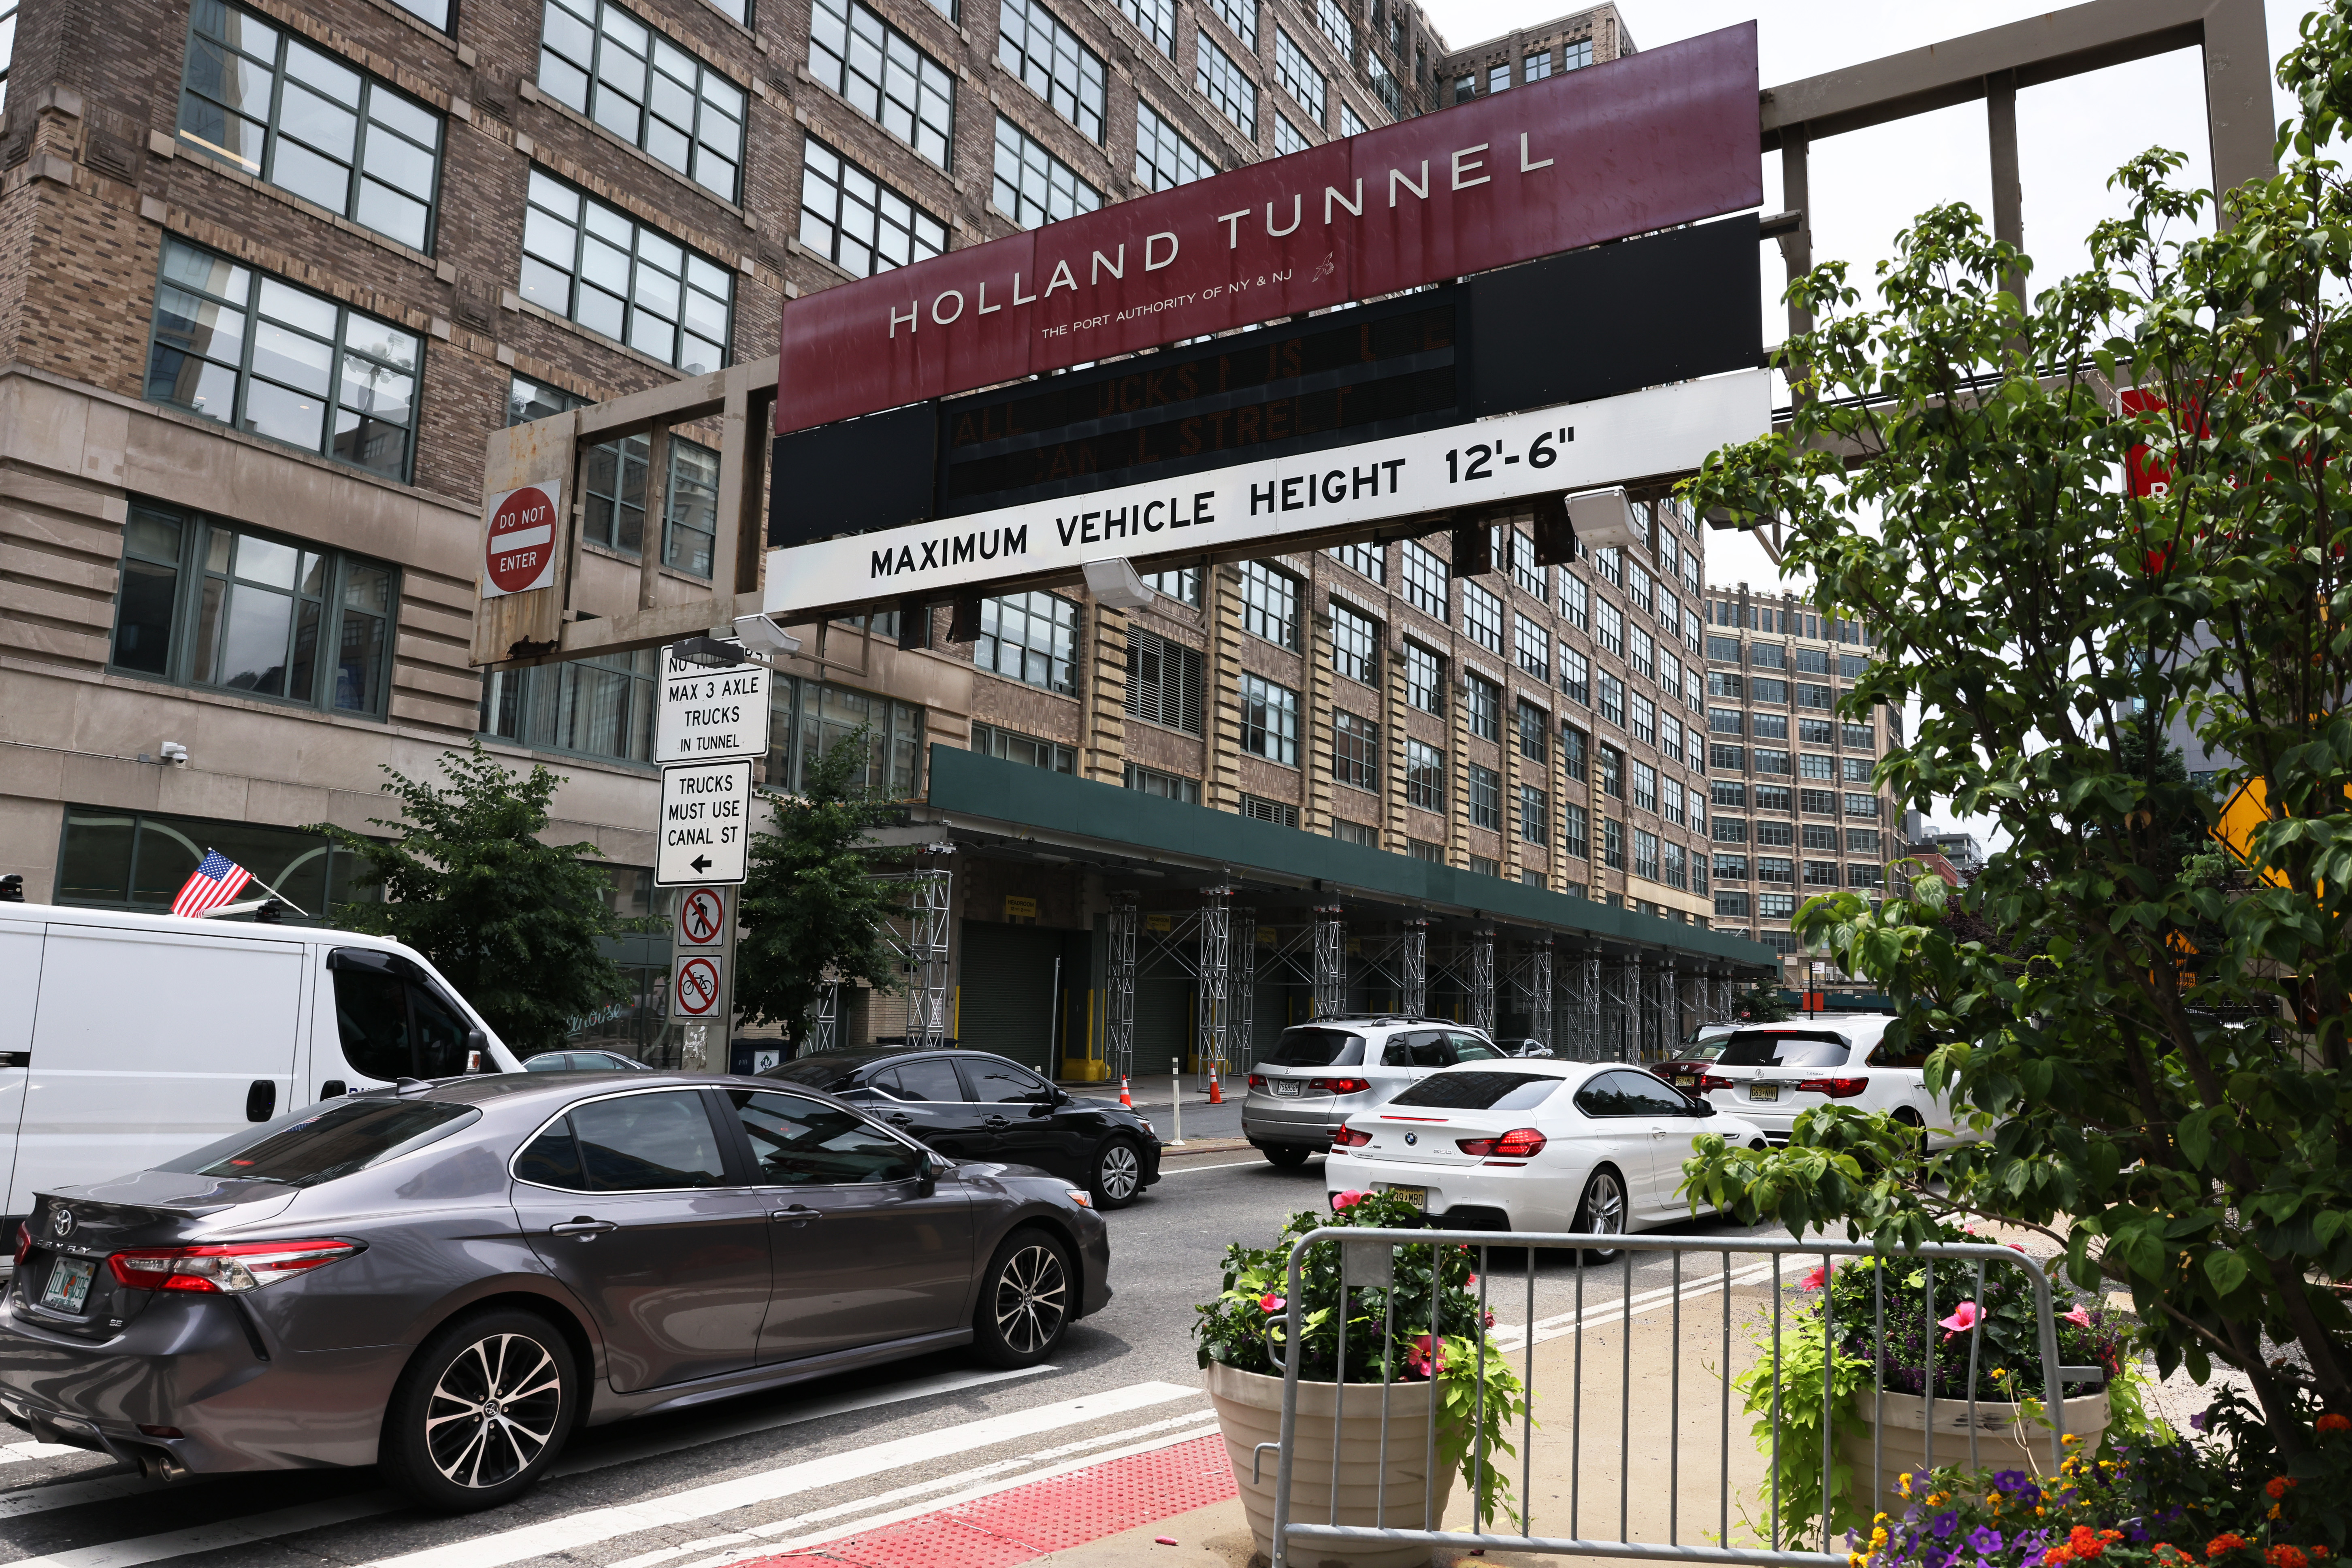 NJ-bound side of Holland Tunnel to close overnight for
nearly 3 years